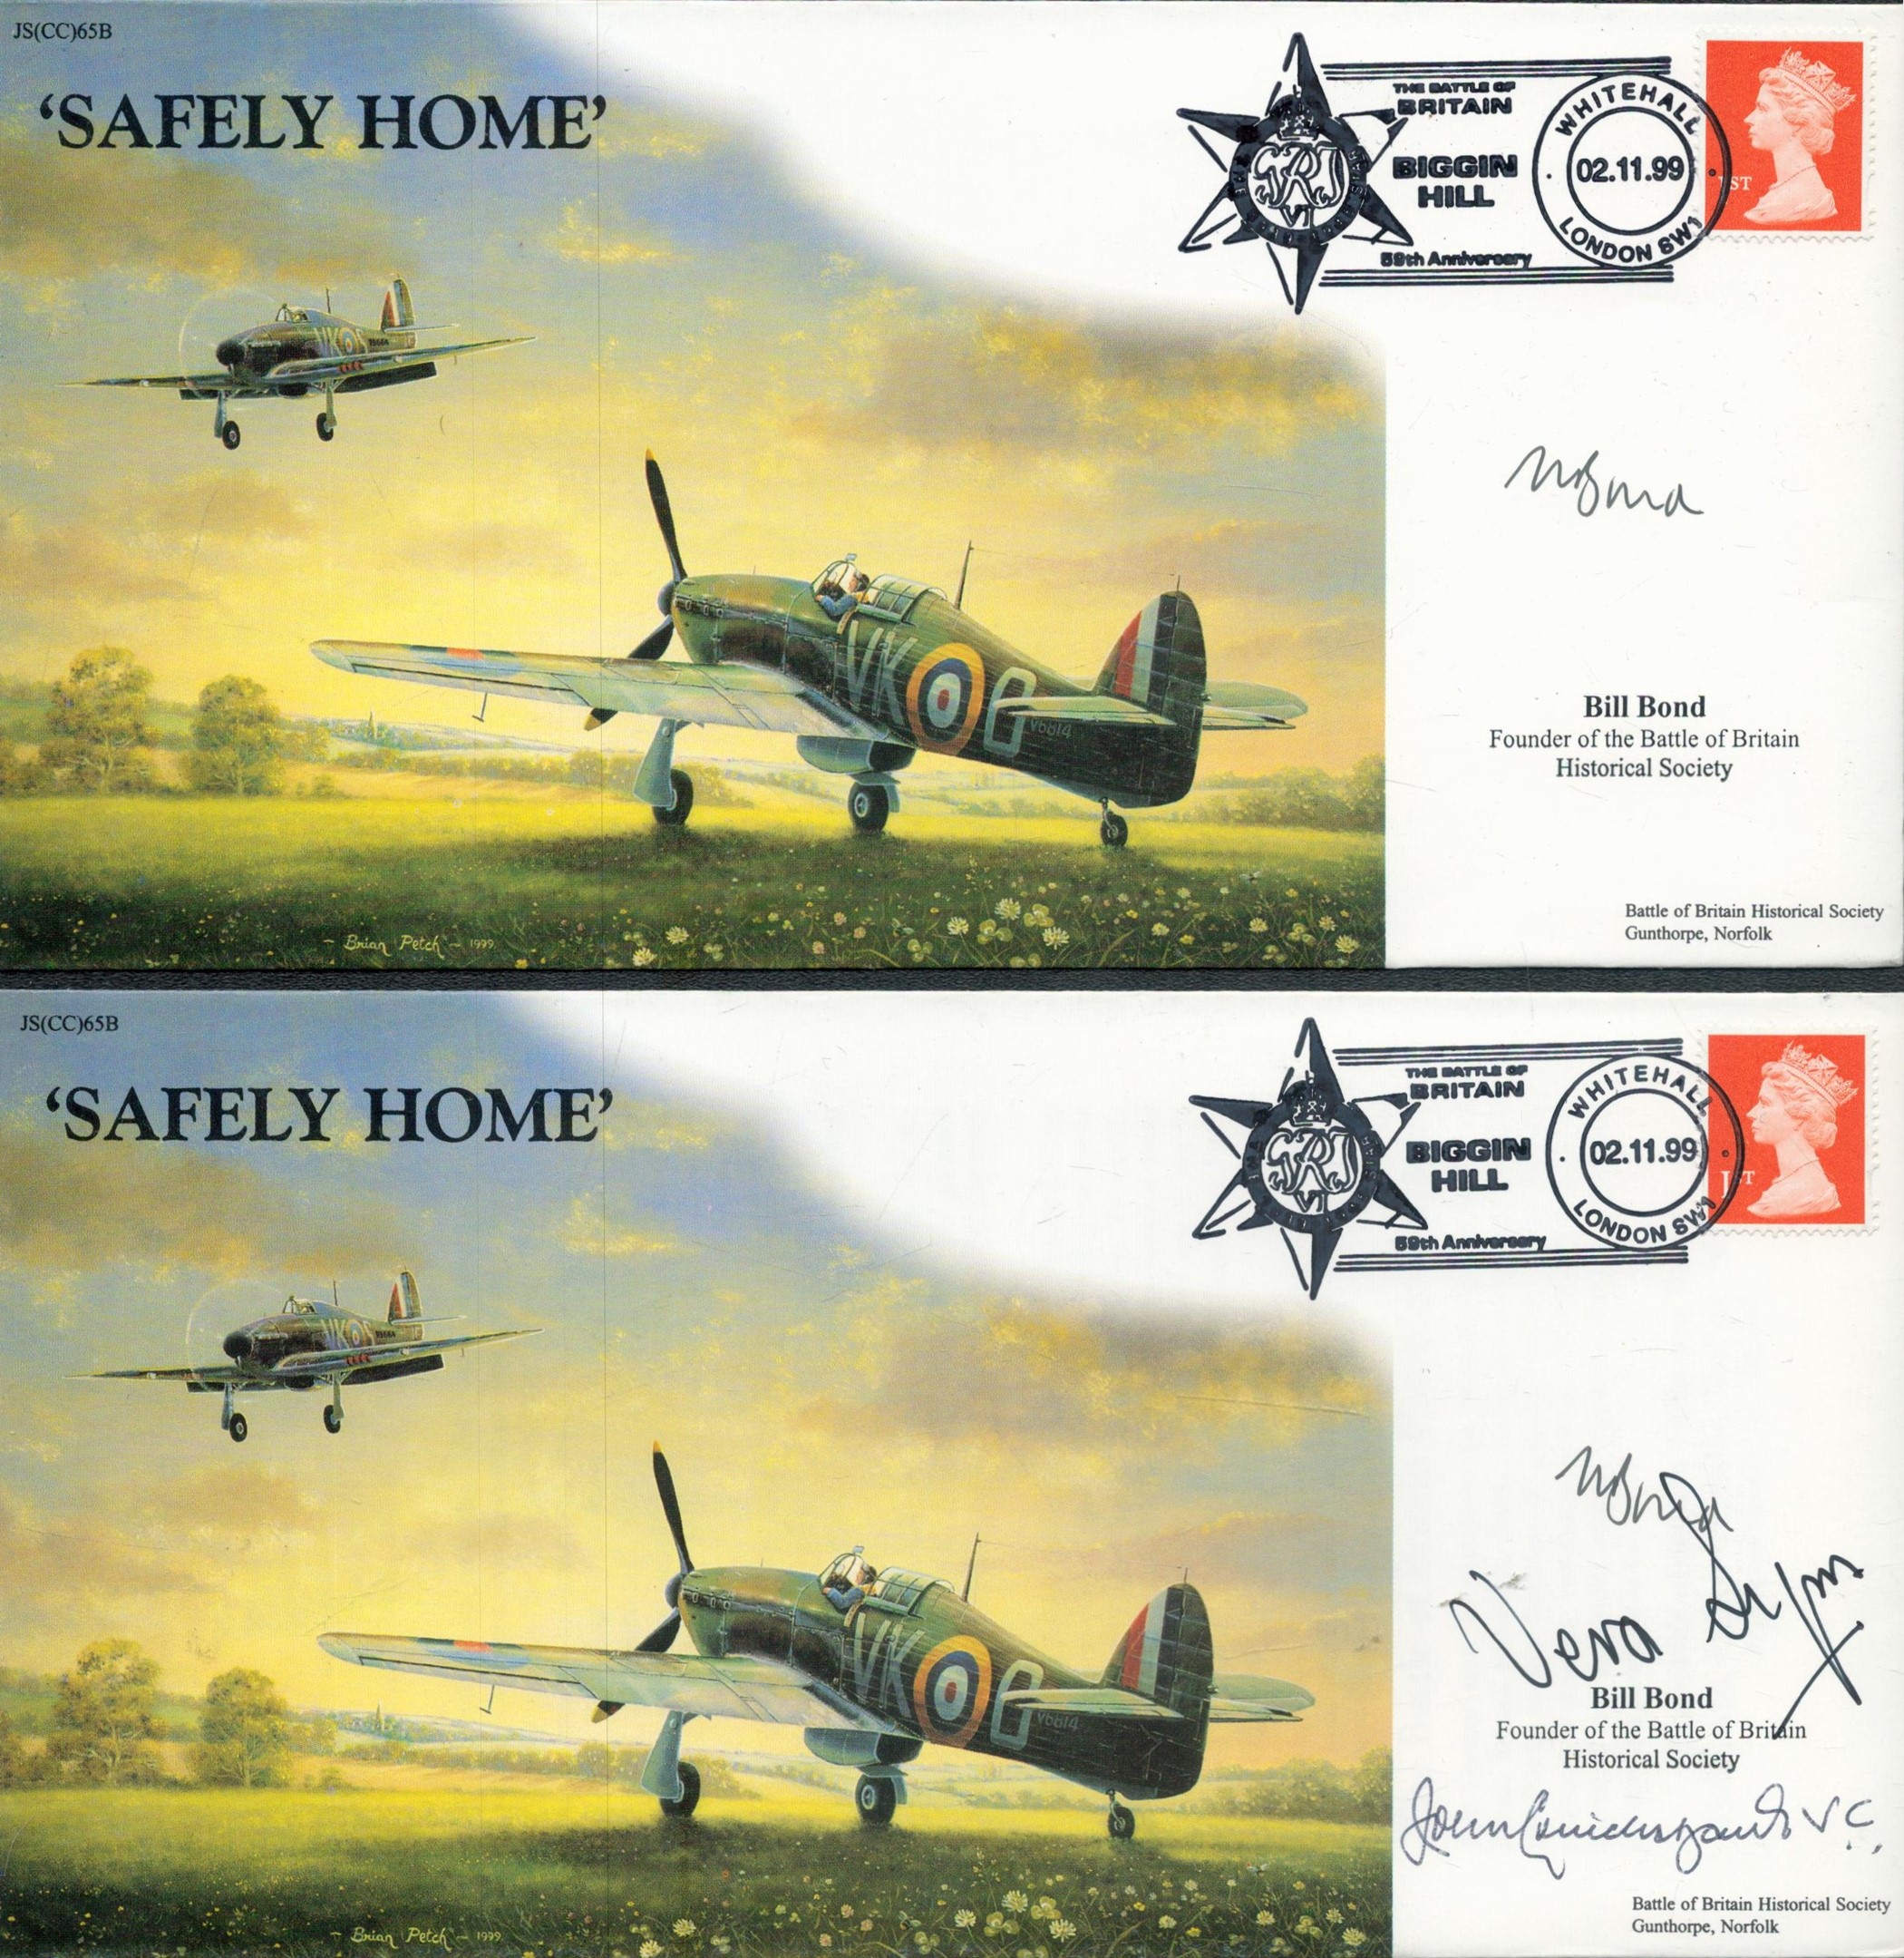 Safely Home Collection of 4 Signed FDCs signatures include Robert F T Doe, Hans-Ekkehard Bob, - Image 6 of 6